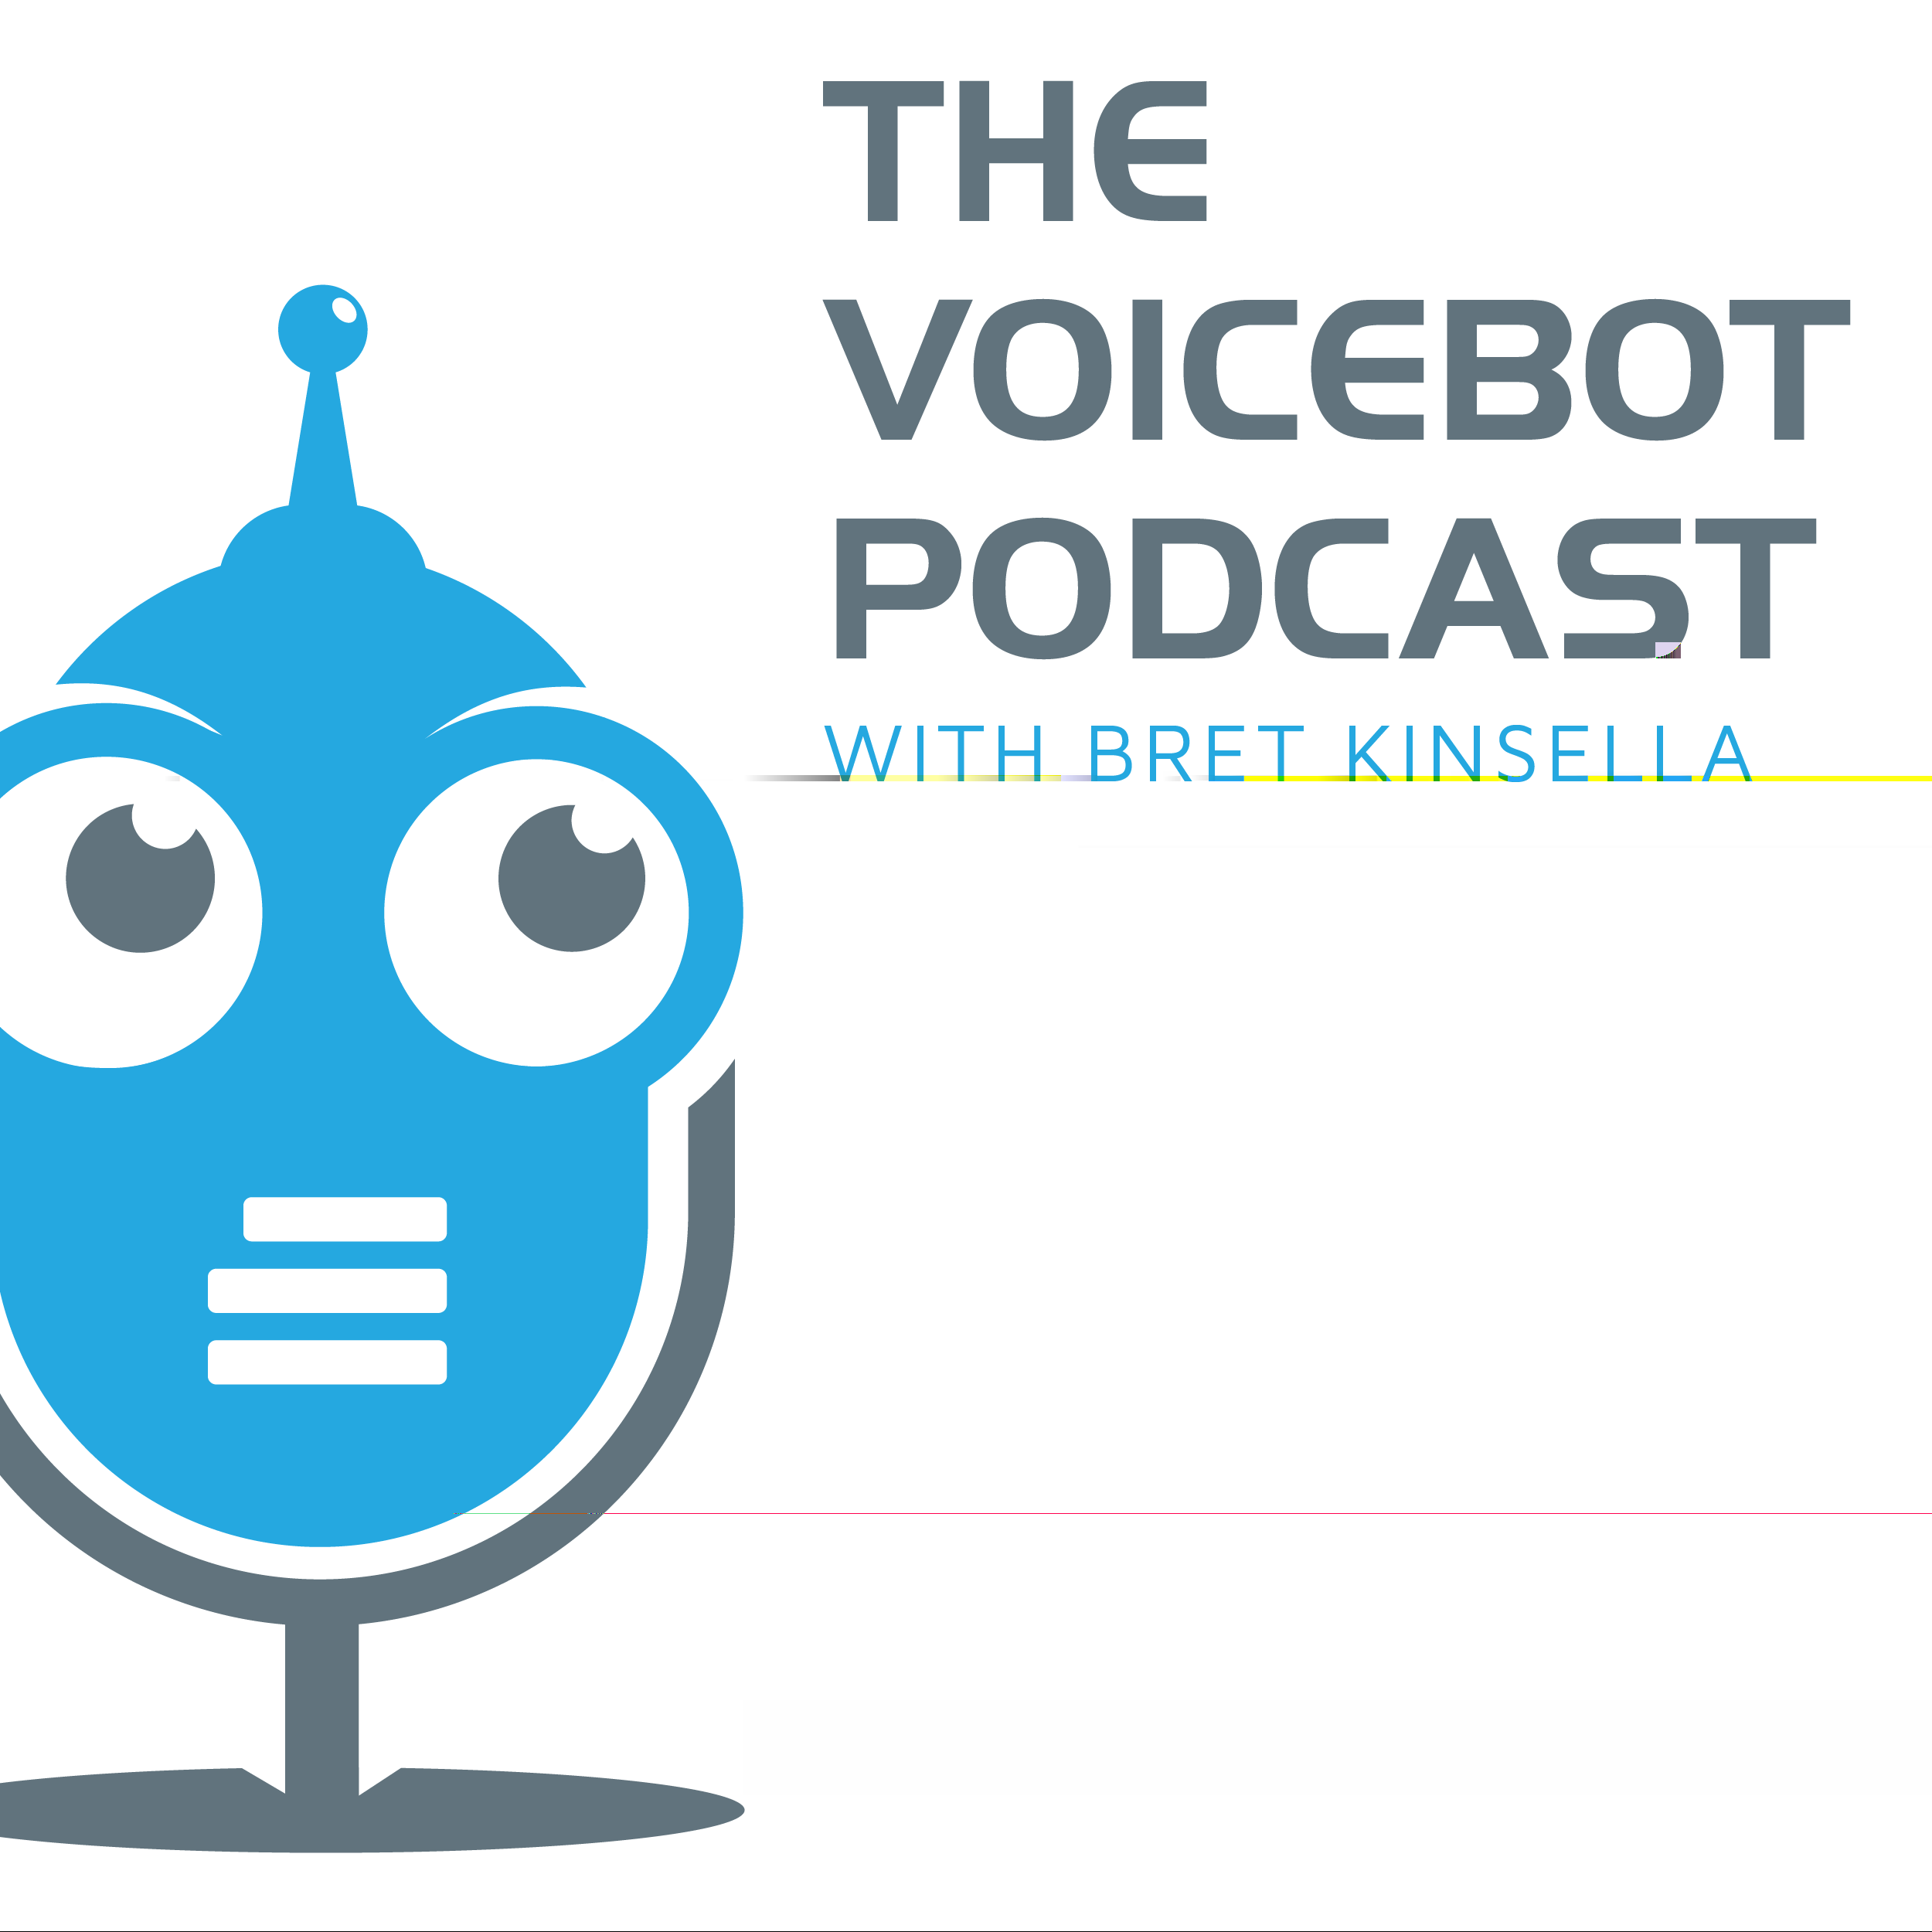 A highlight from Adam Cheyer Co-founder of Siri and Viv Labs on Assistants, AI, and ChatGPT - Voicebot Podcast Ep 324